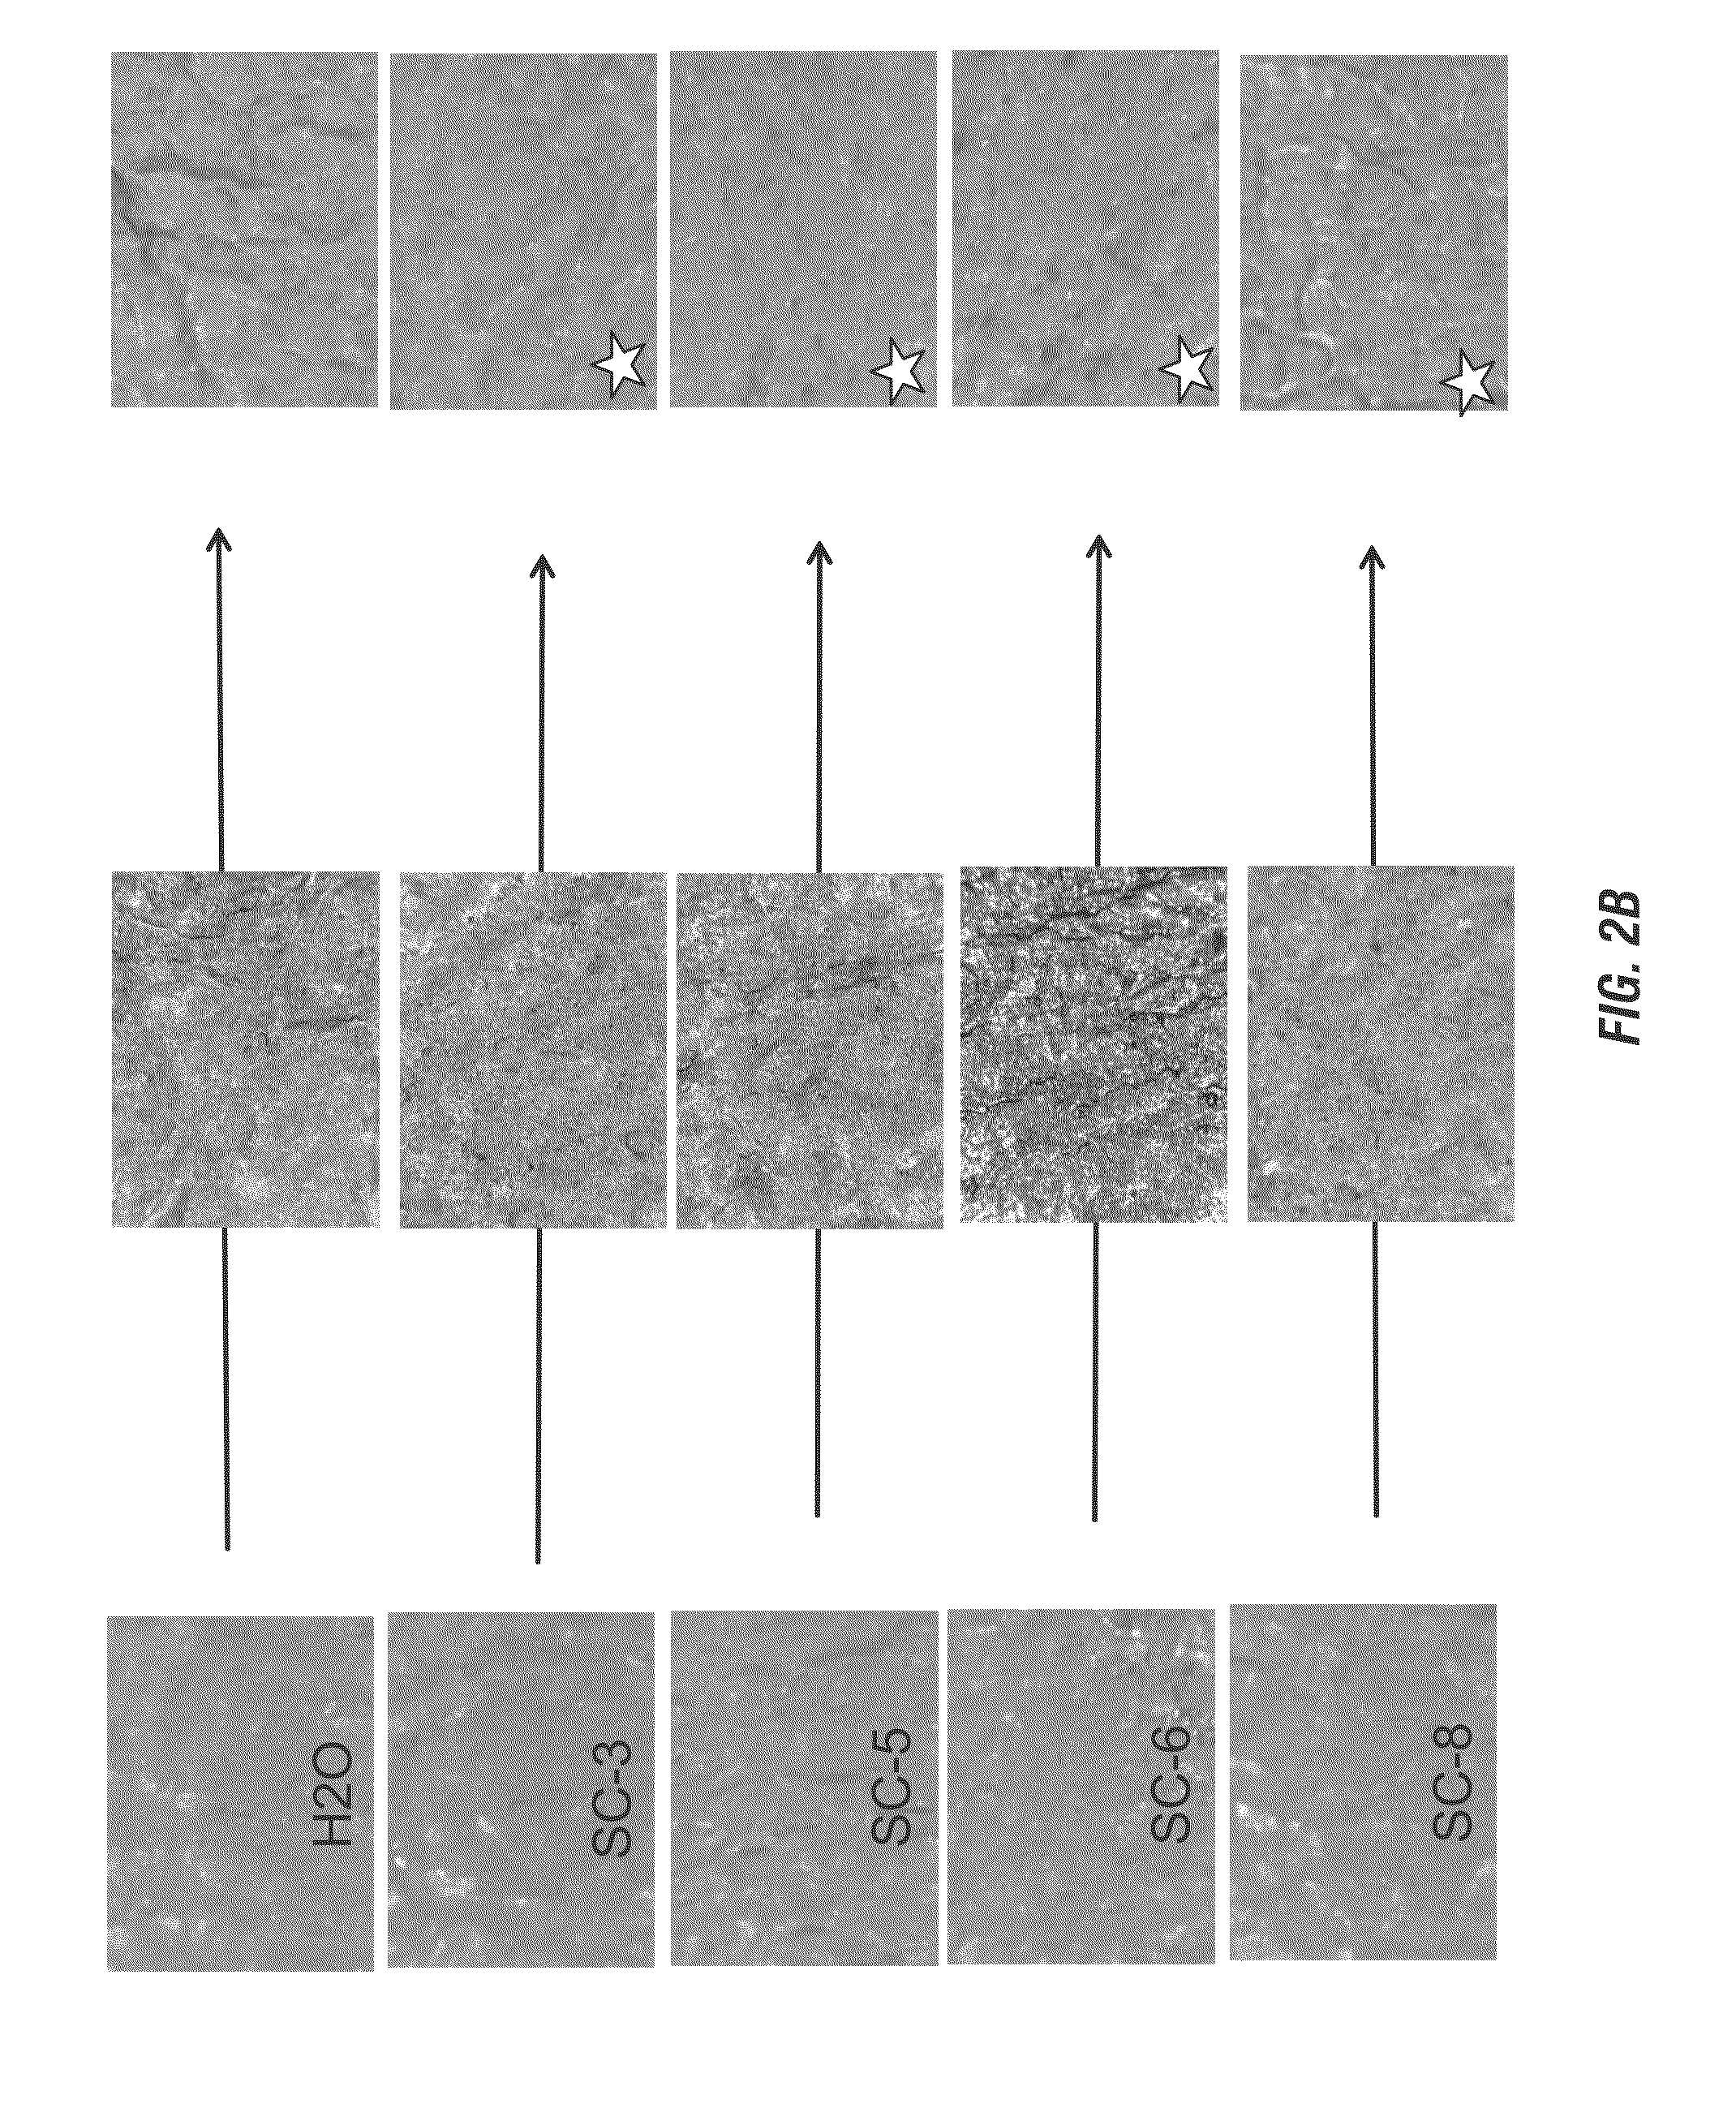 Leather and/or vinyl cleaner and moisturizer and method of making same